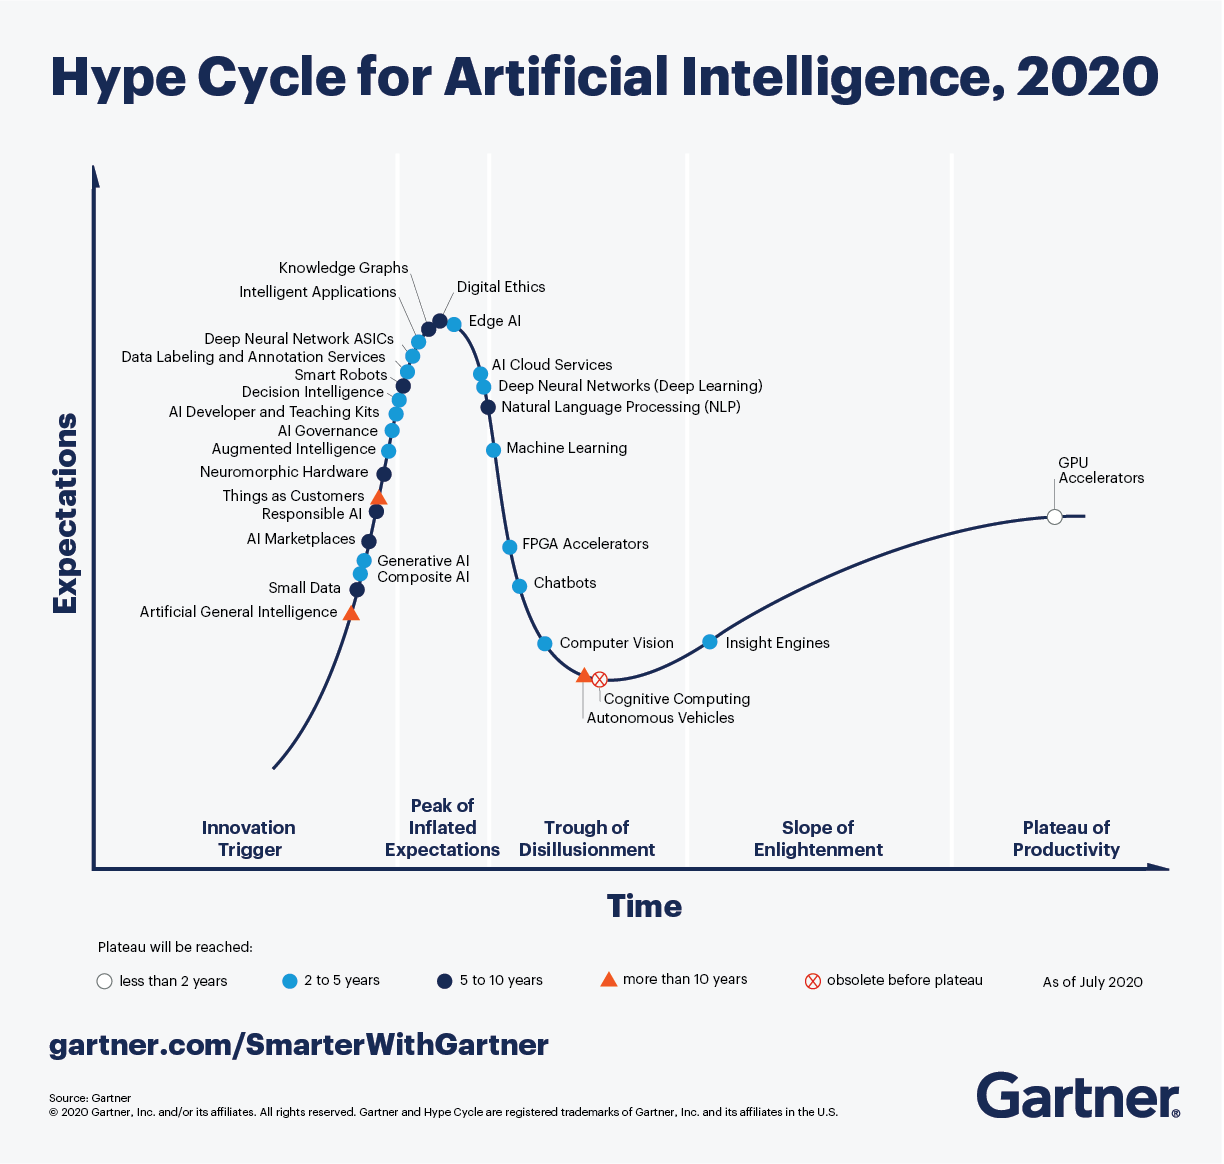 Hype cycle for AI as measured by time and expectations